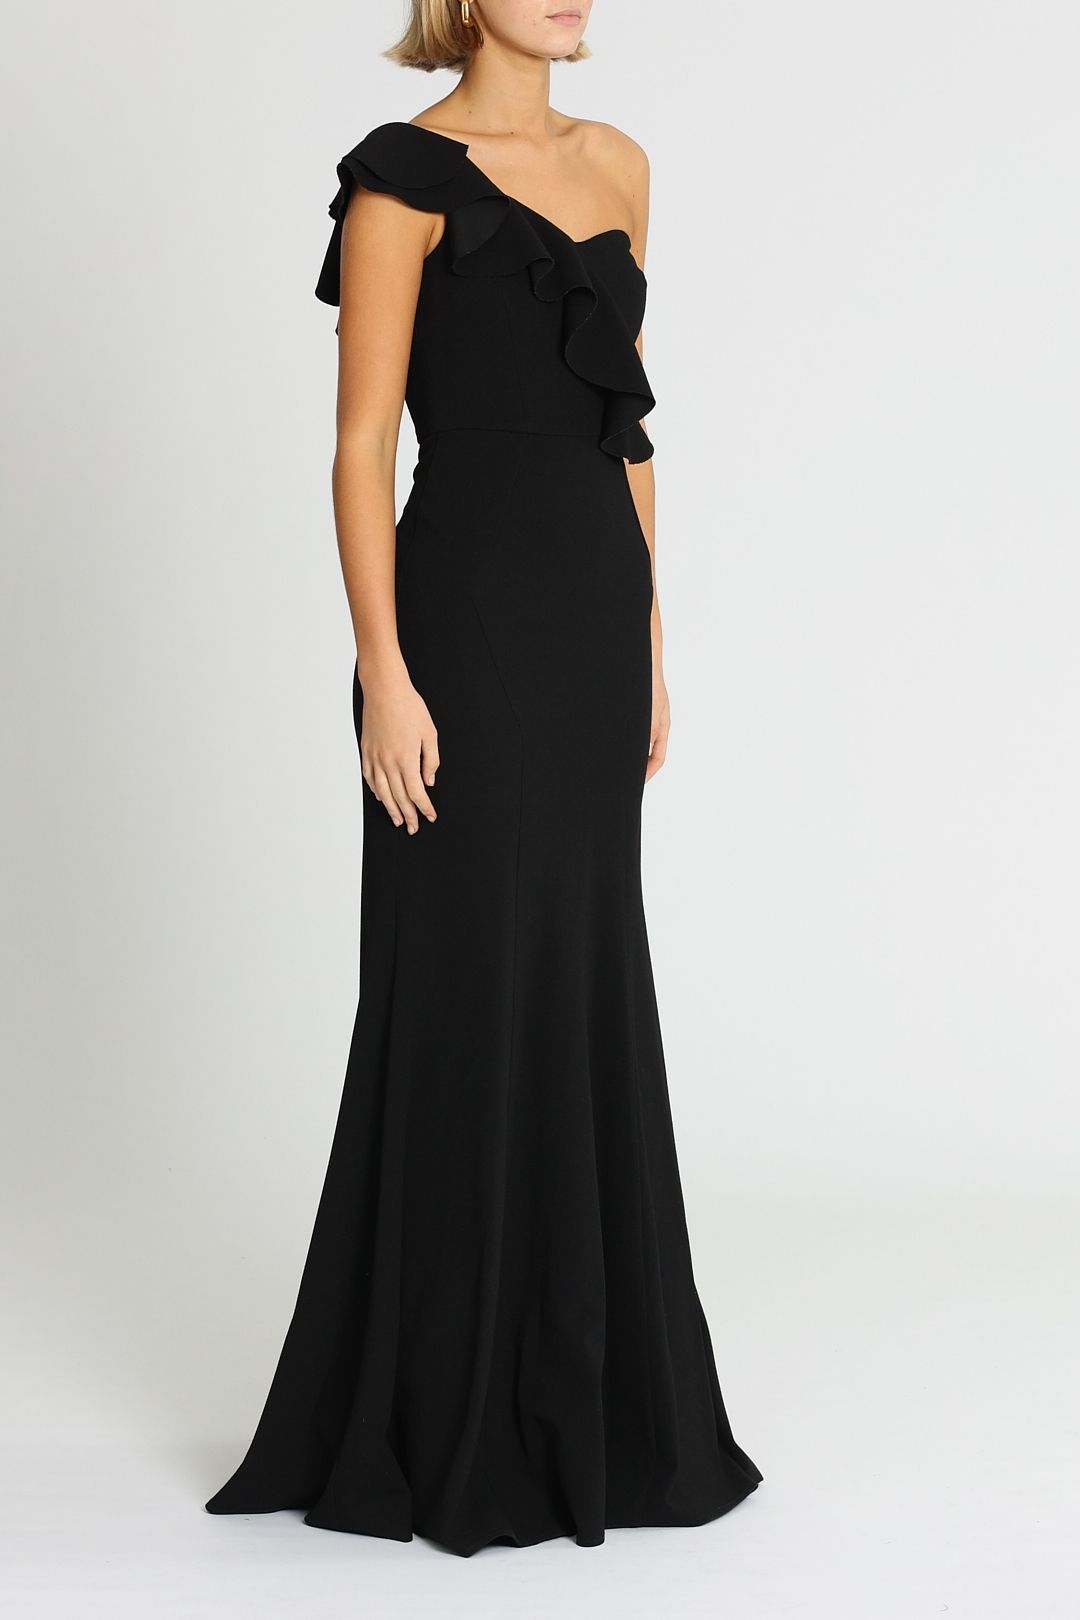 Gigi Bustiere Gown in Black by Rebecca Vallance for Rent